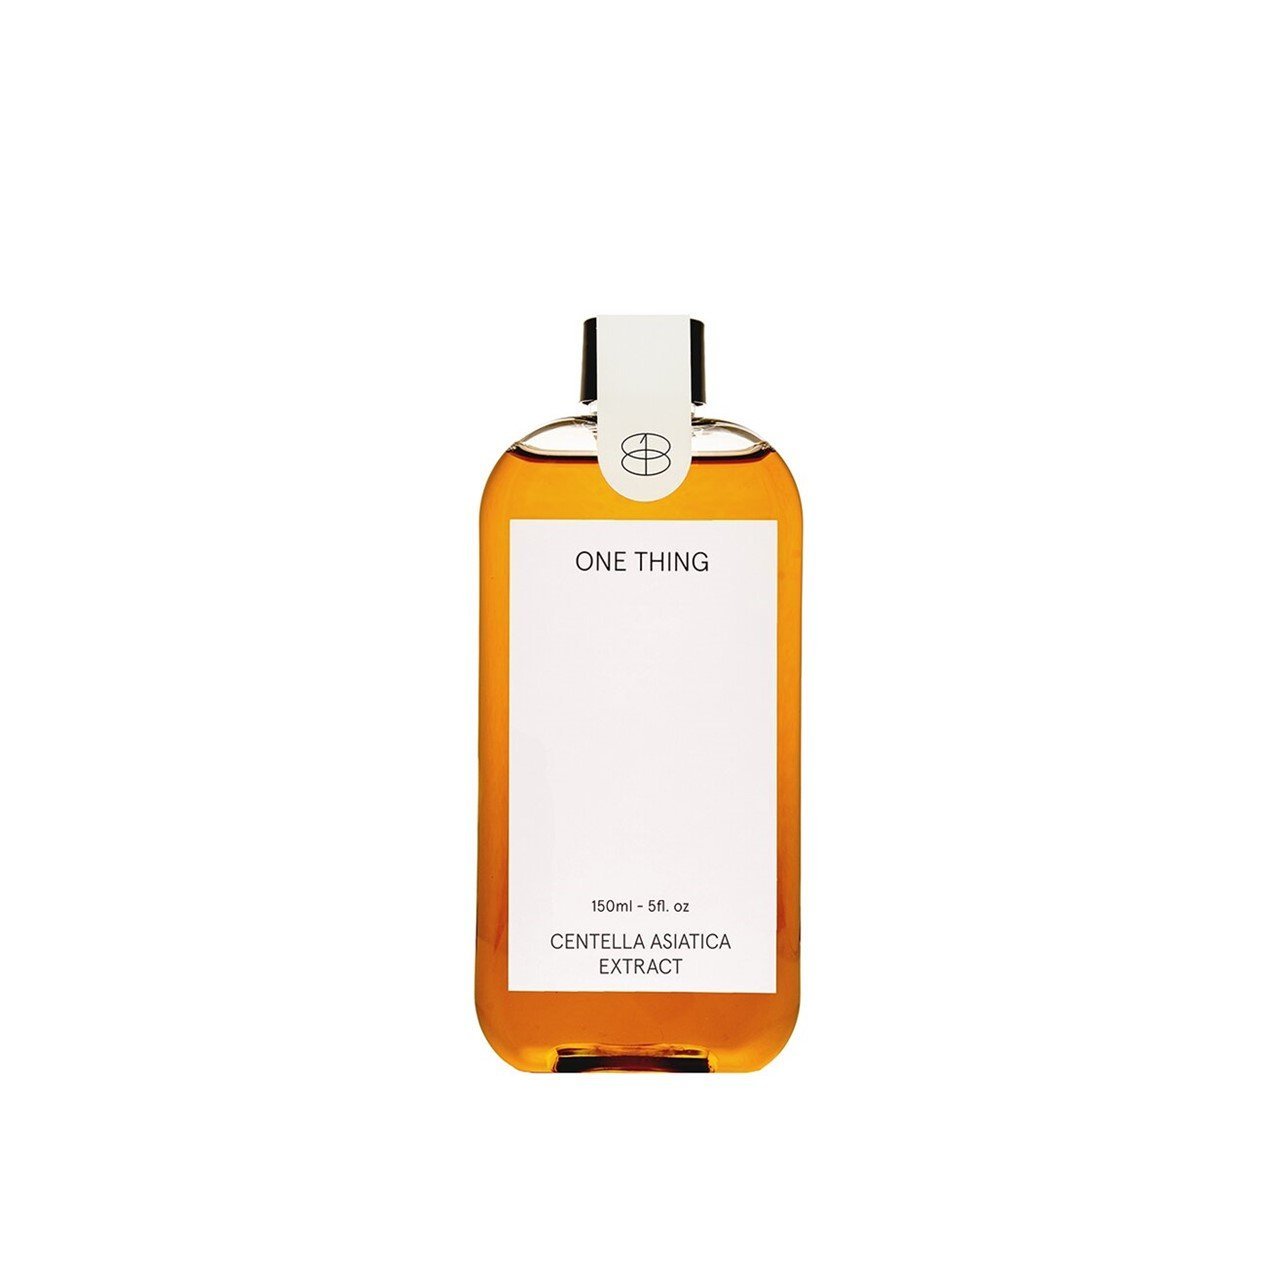 One Thing Centella Asiatica Extract Toner 150ml